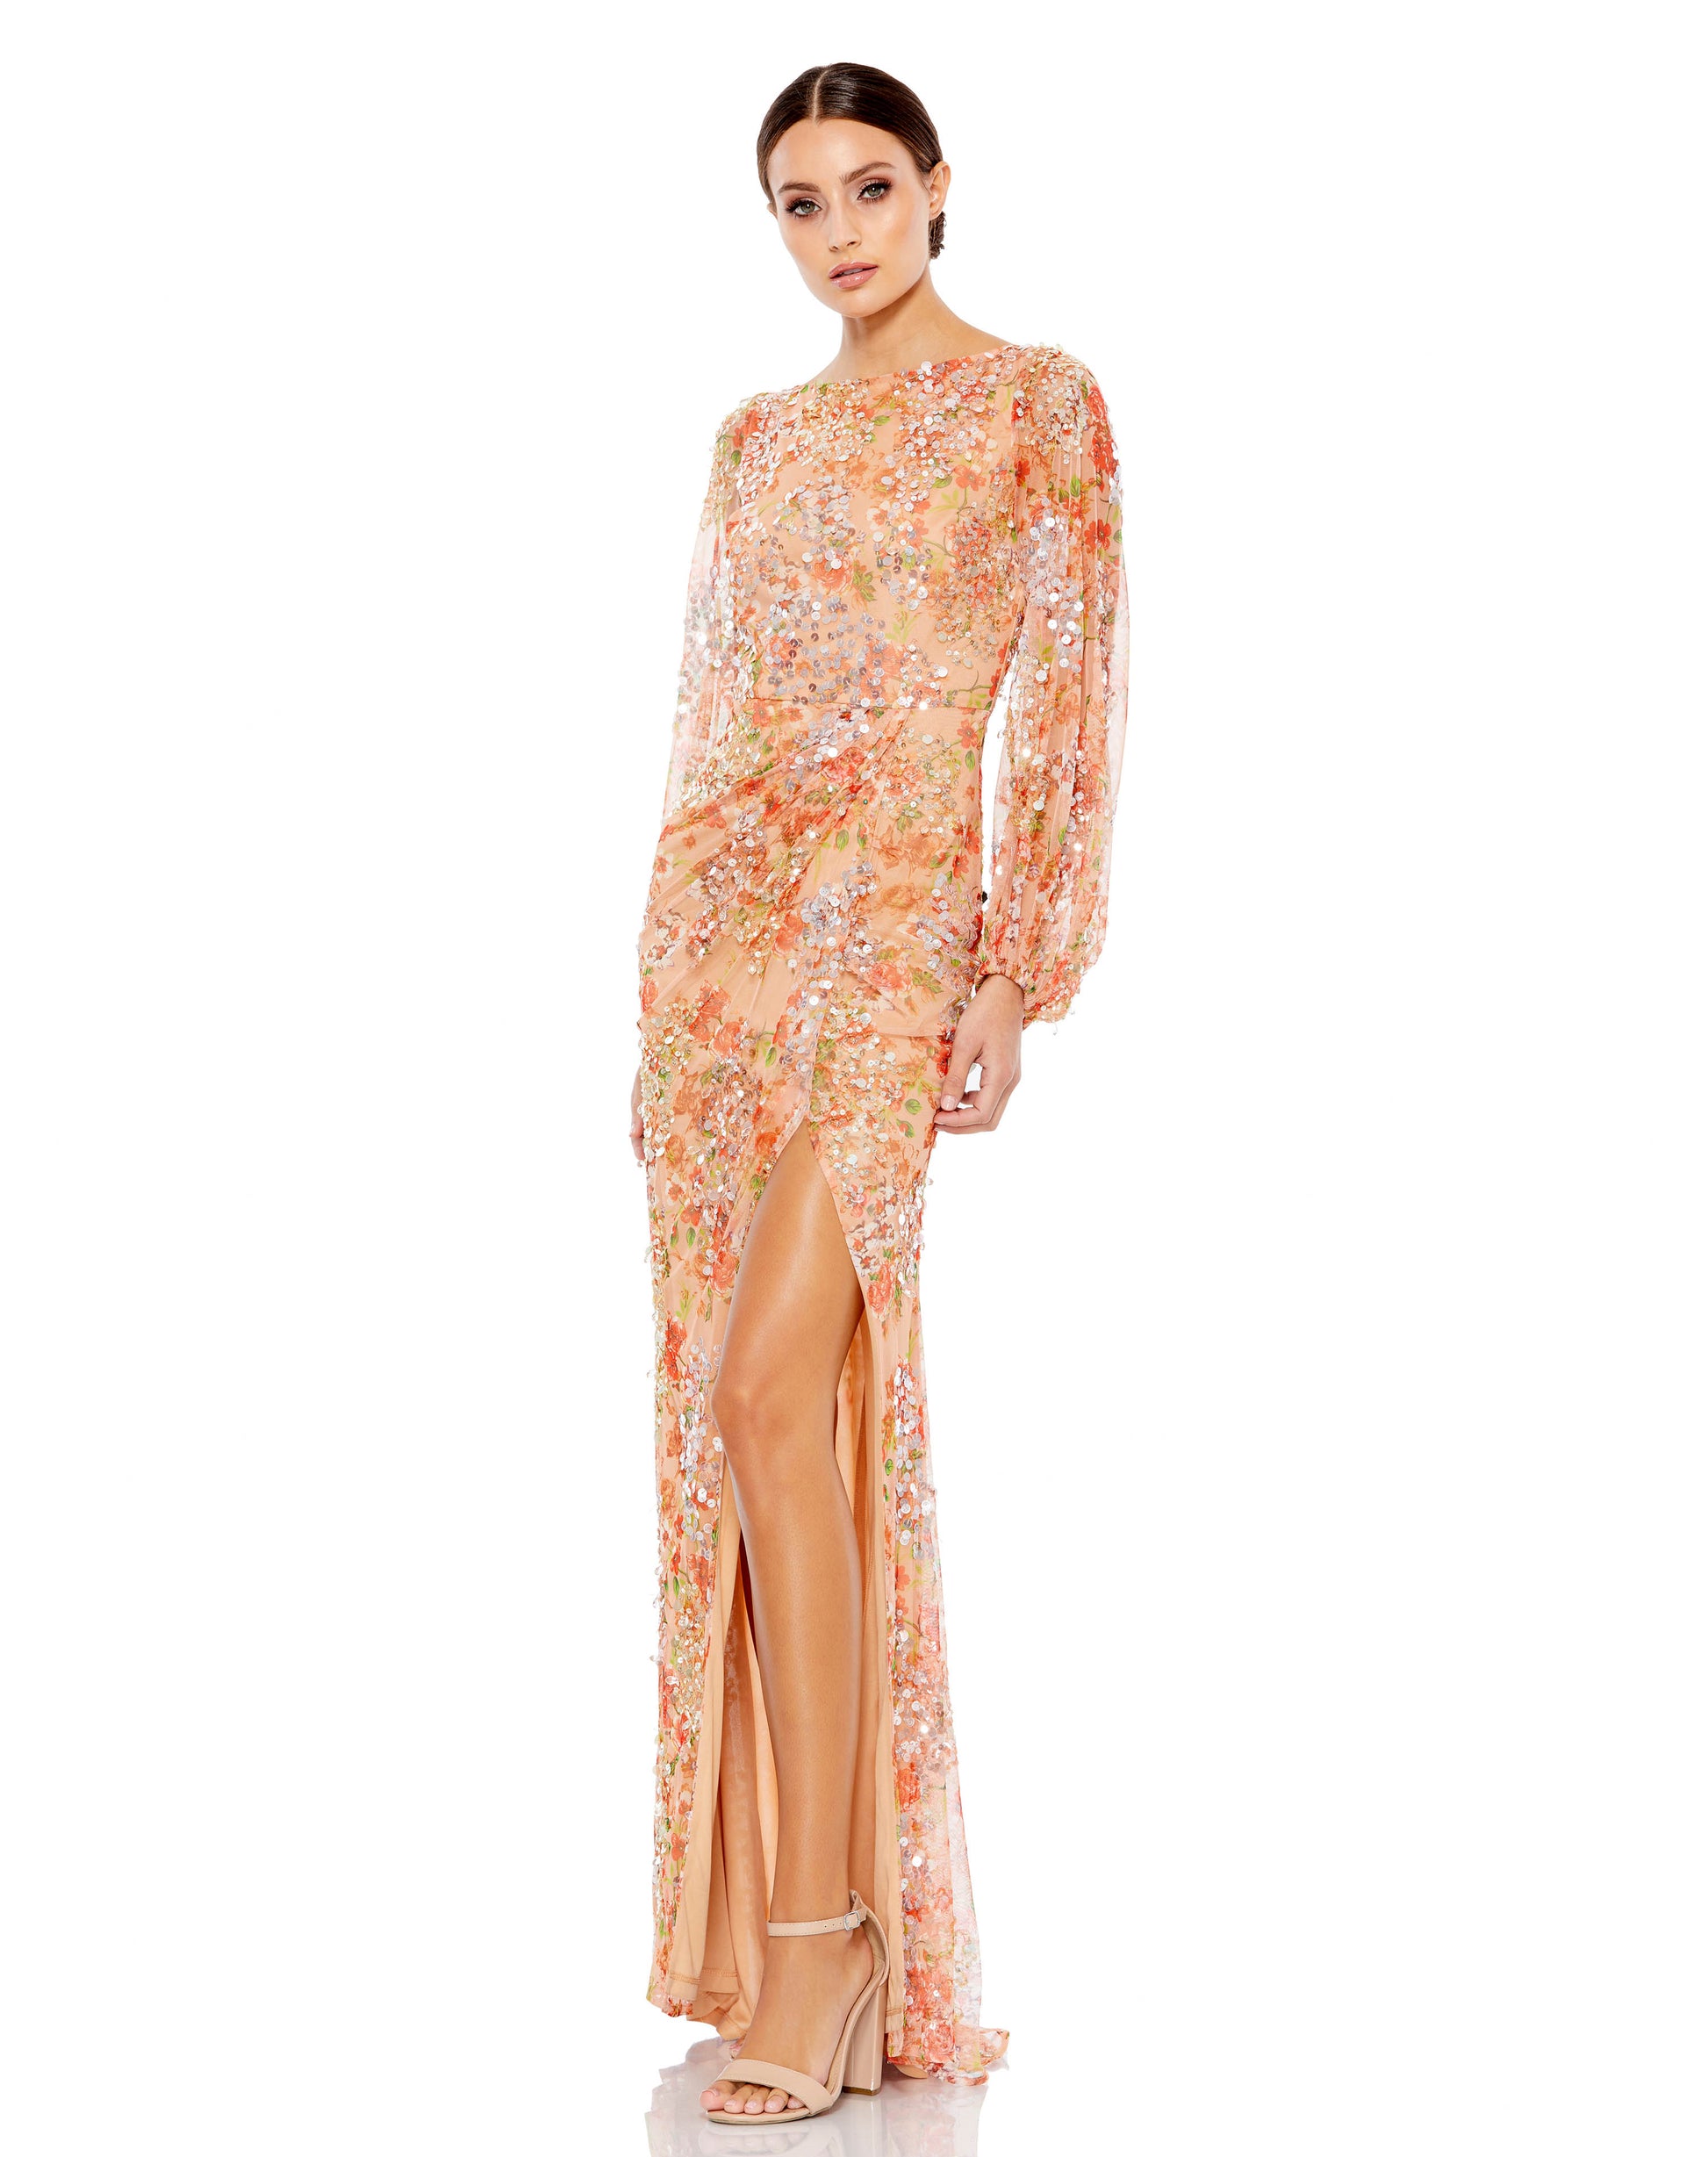 Stunning floral print gown with blouson sleeves, sequin detailing, and thigh-high slit. Mac Duggal Fully Lined 100% Polyester Long Sleeve Thigh-High Slit Full Length Style #93547